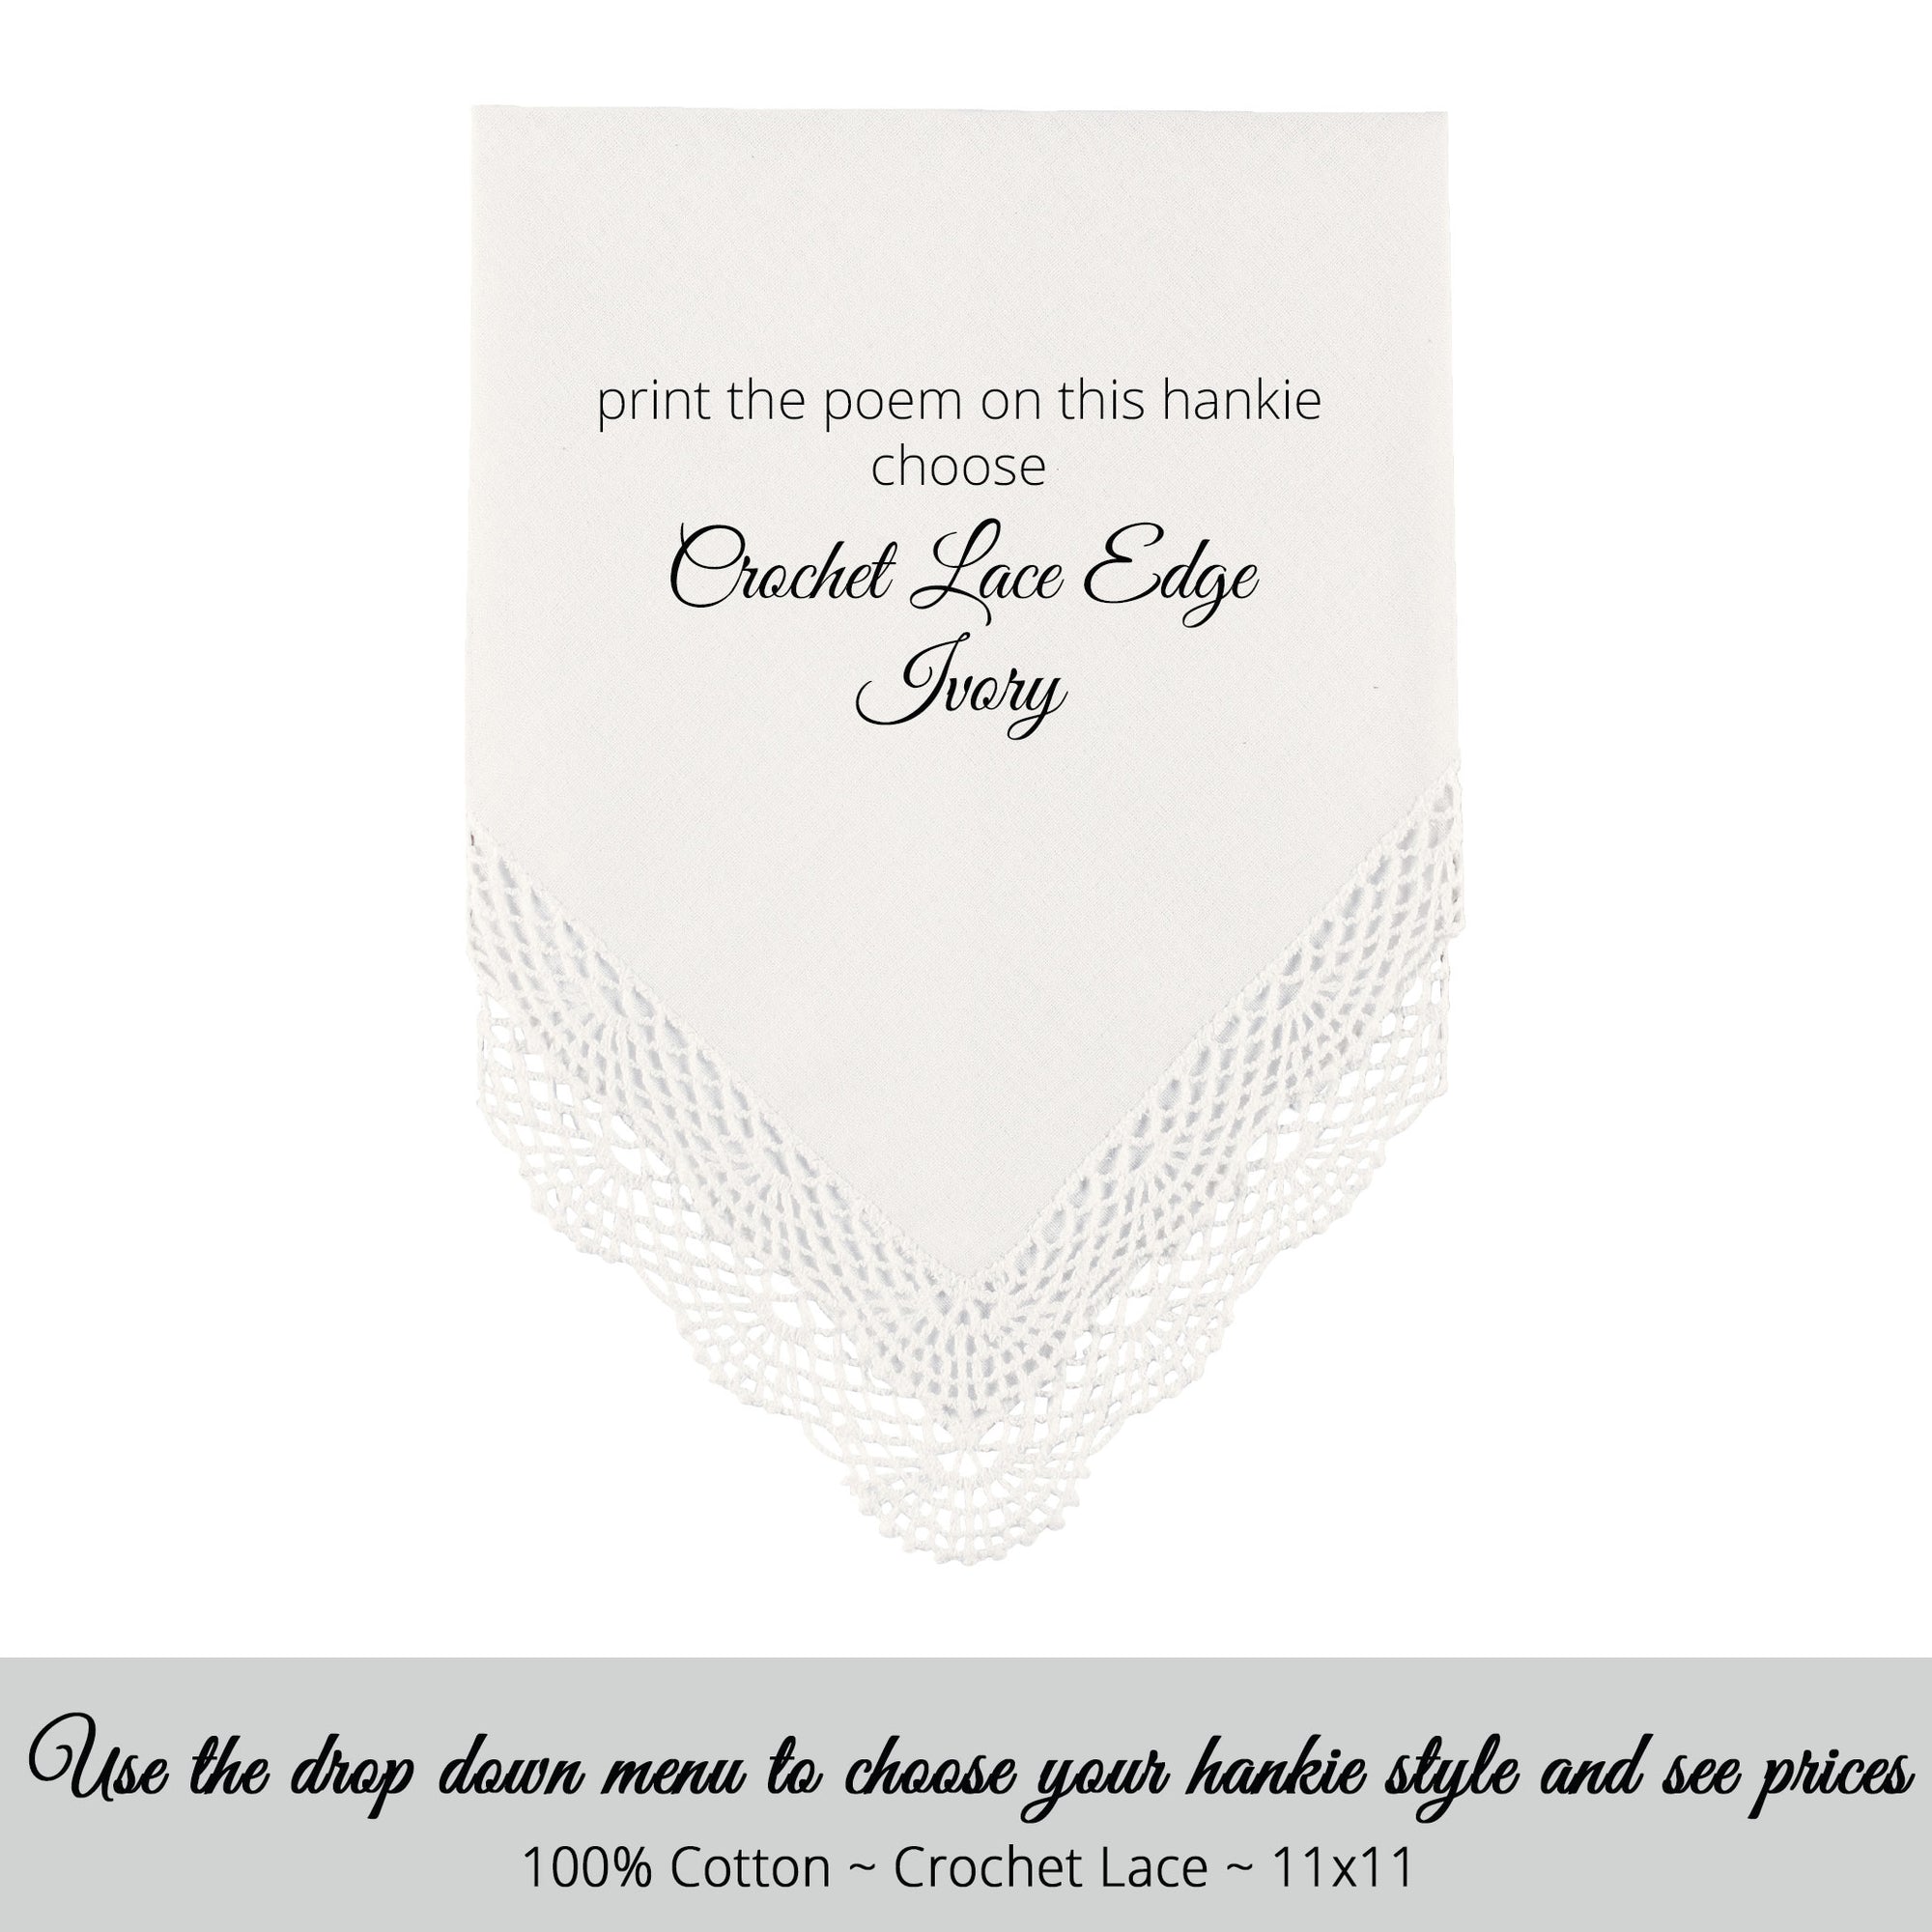 Wedding handkerchief ivory with crochet lace edge for the maid of honor poem printed hankie